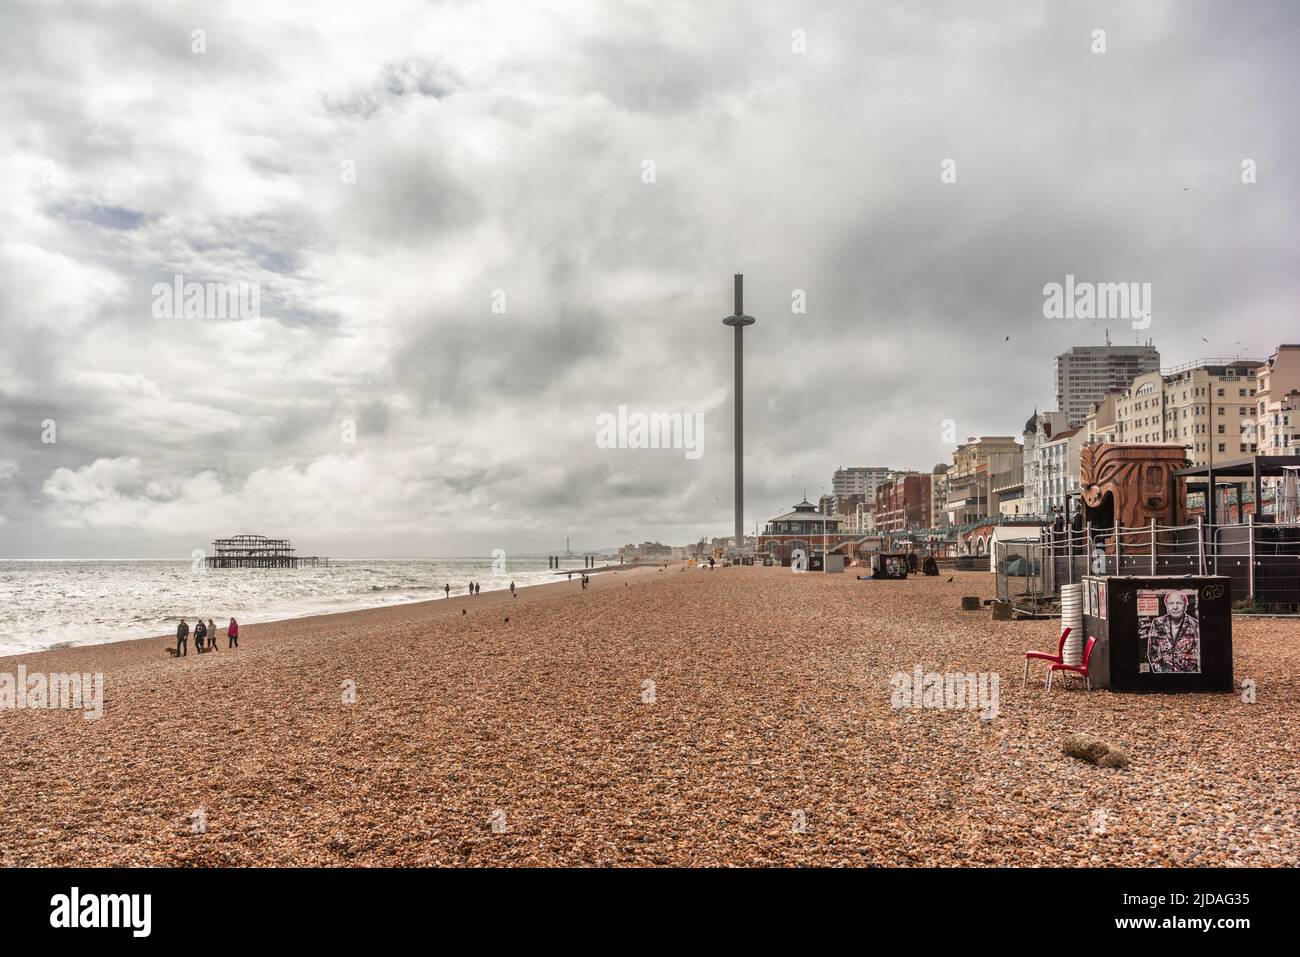 Brighton beach / seafront with view towards the British Aiways i360 observation tower and West Pier, East Sussex, England, UK Stock Photo